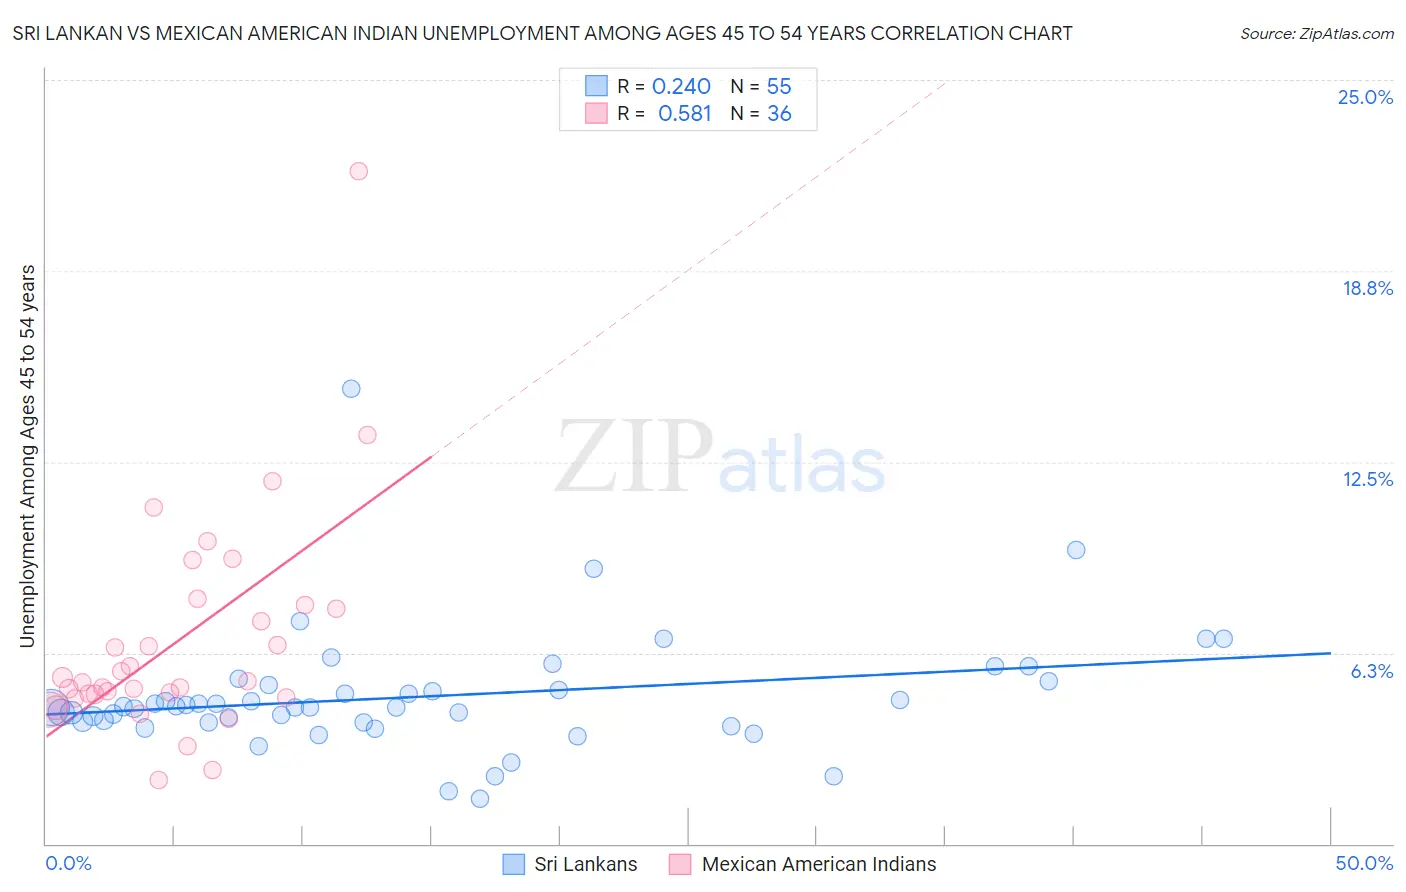 Sri Lankan vs Mexican American Indian Unemployment Among Ages 45 to 54 years